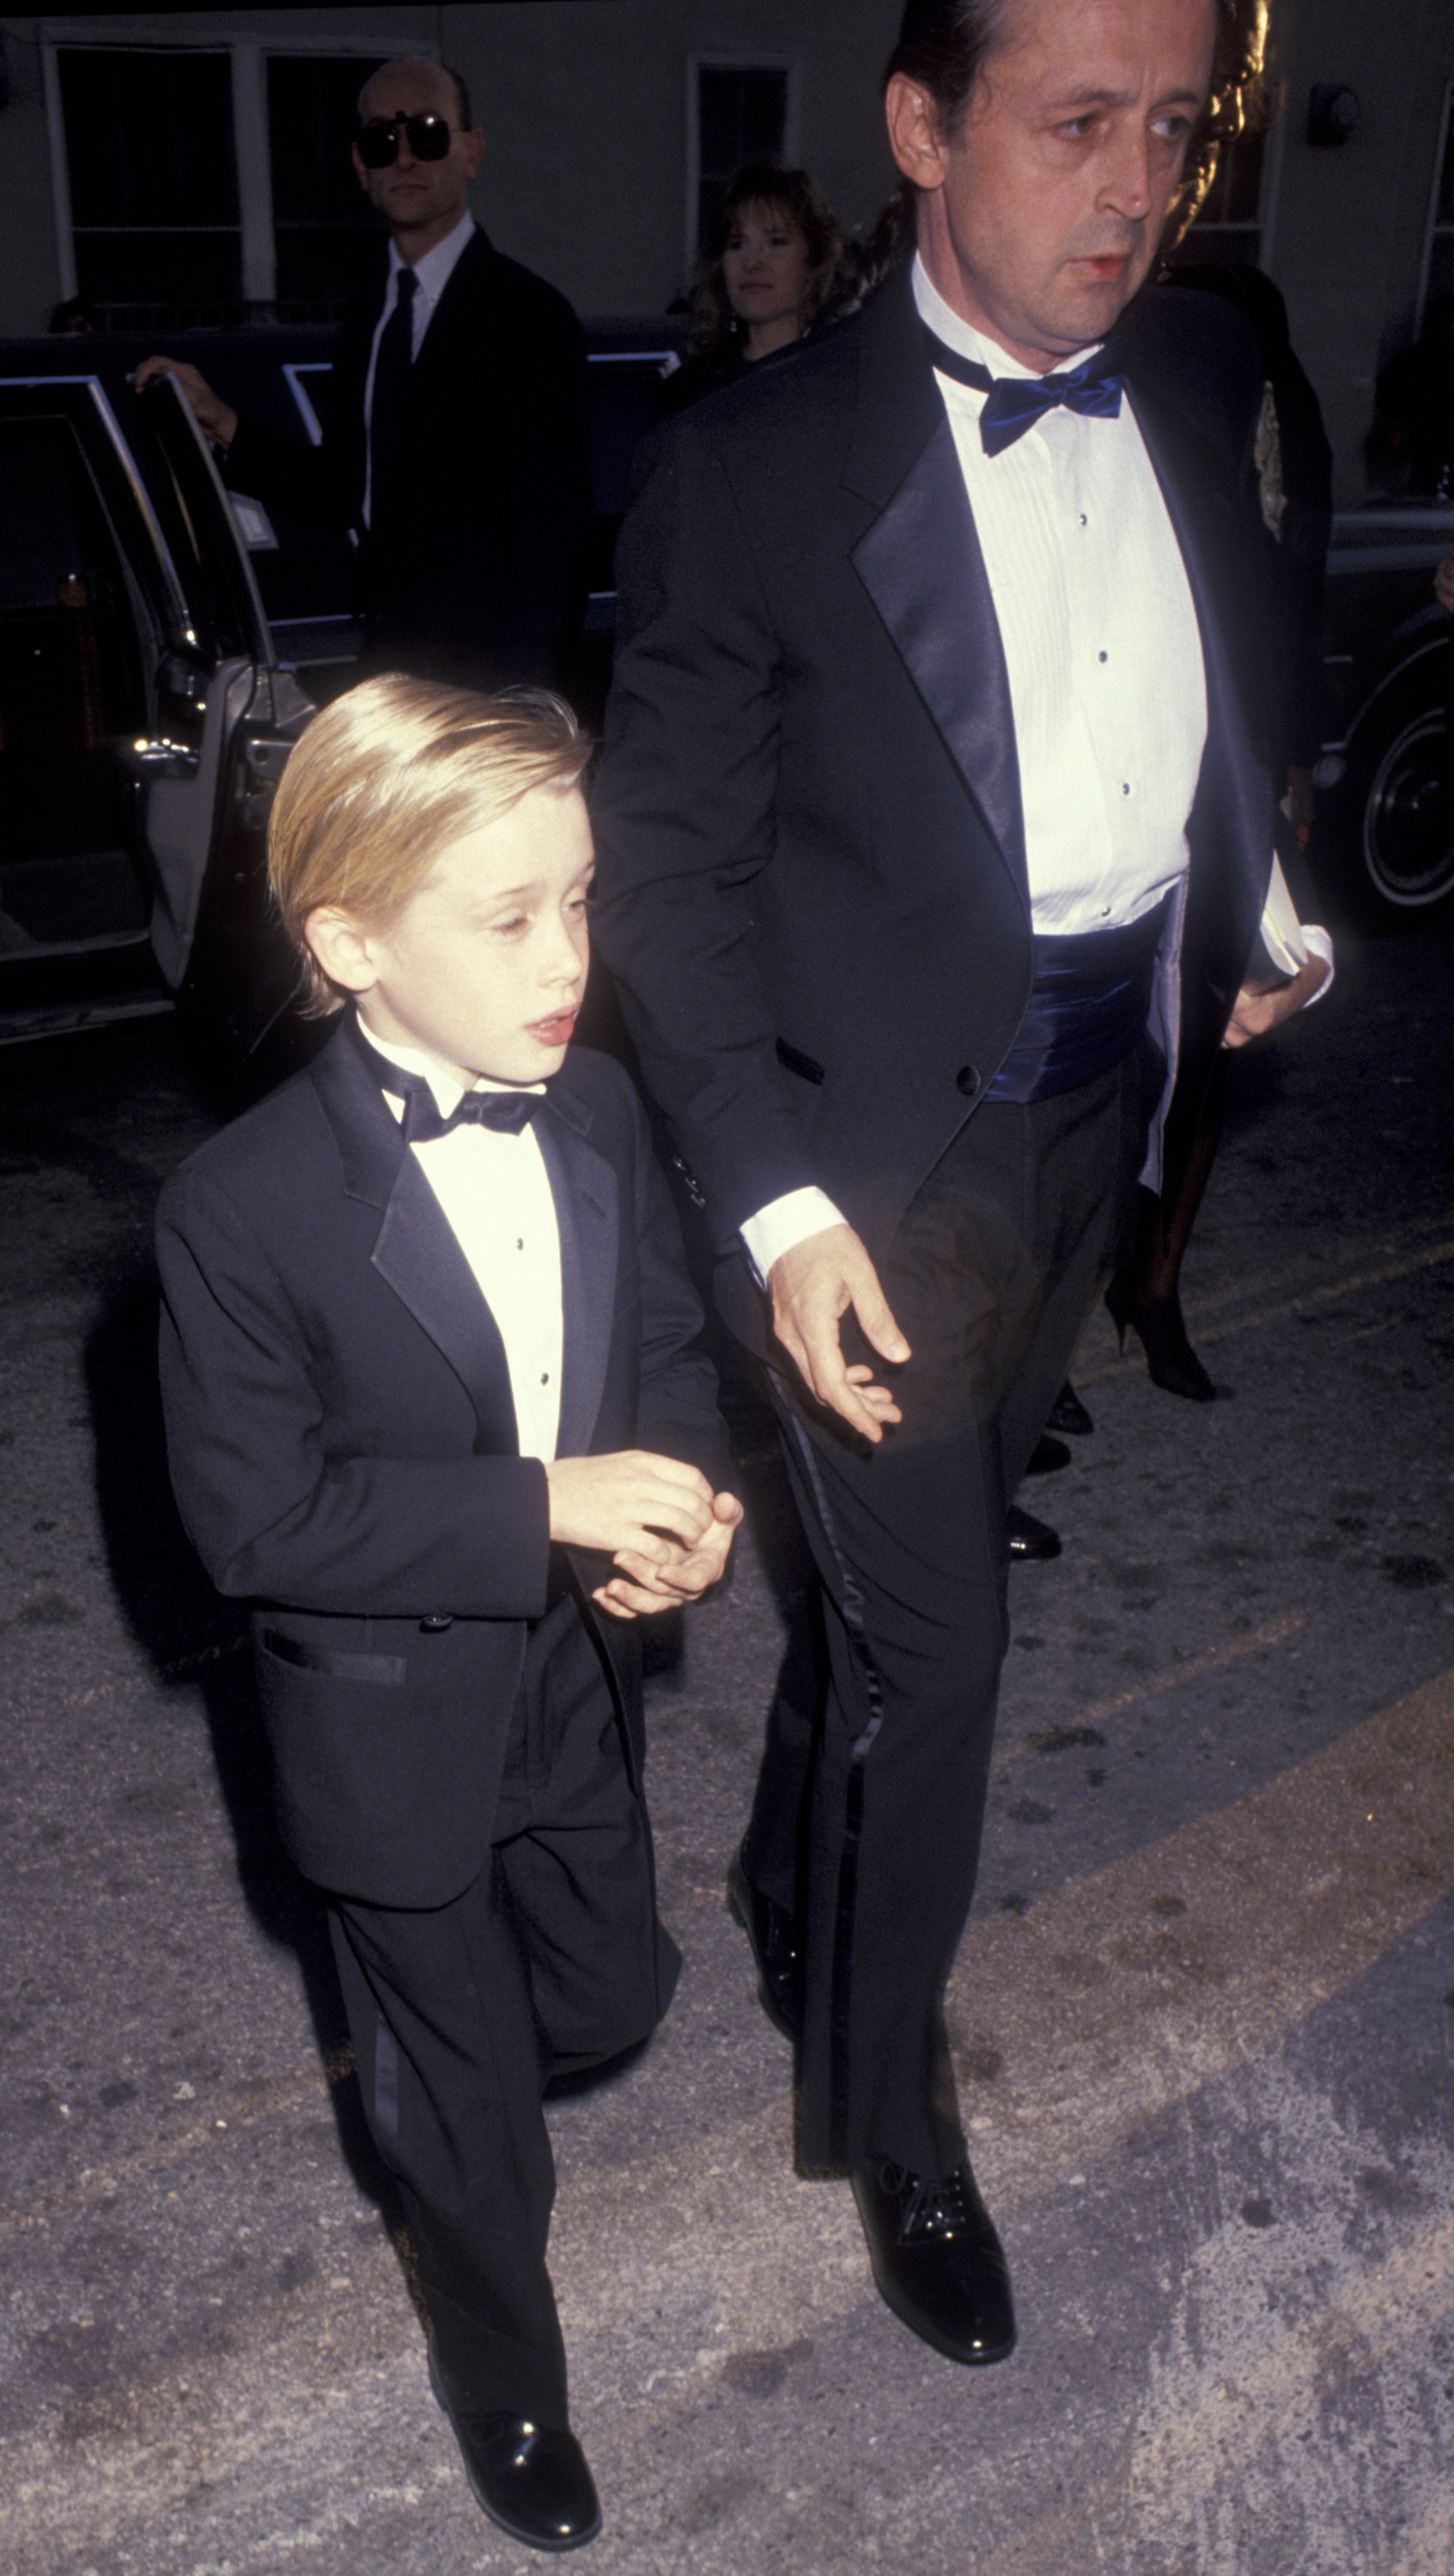 Macaulay Culkin and father Kit Culkin attend 17th Annual People's Choice Awards on March 11, 1993, at Paramount Studios in Hollywood, California | Source: Getty Images